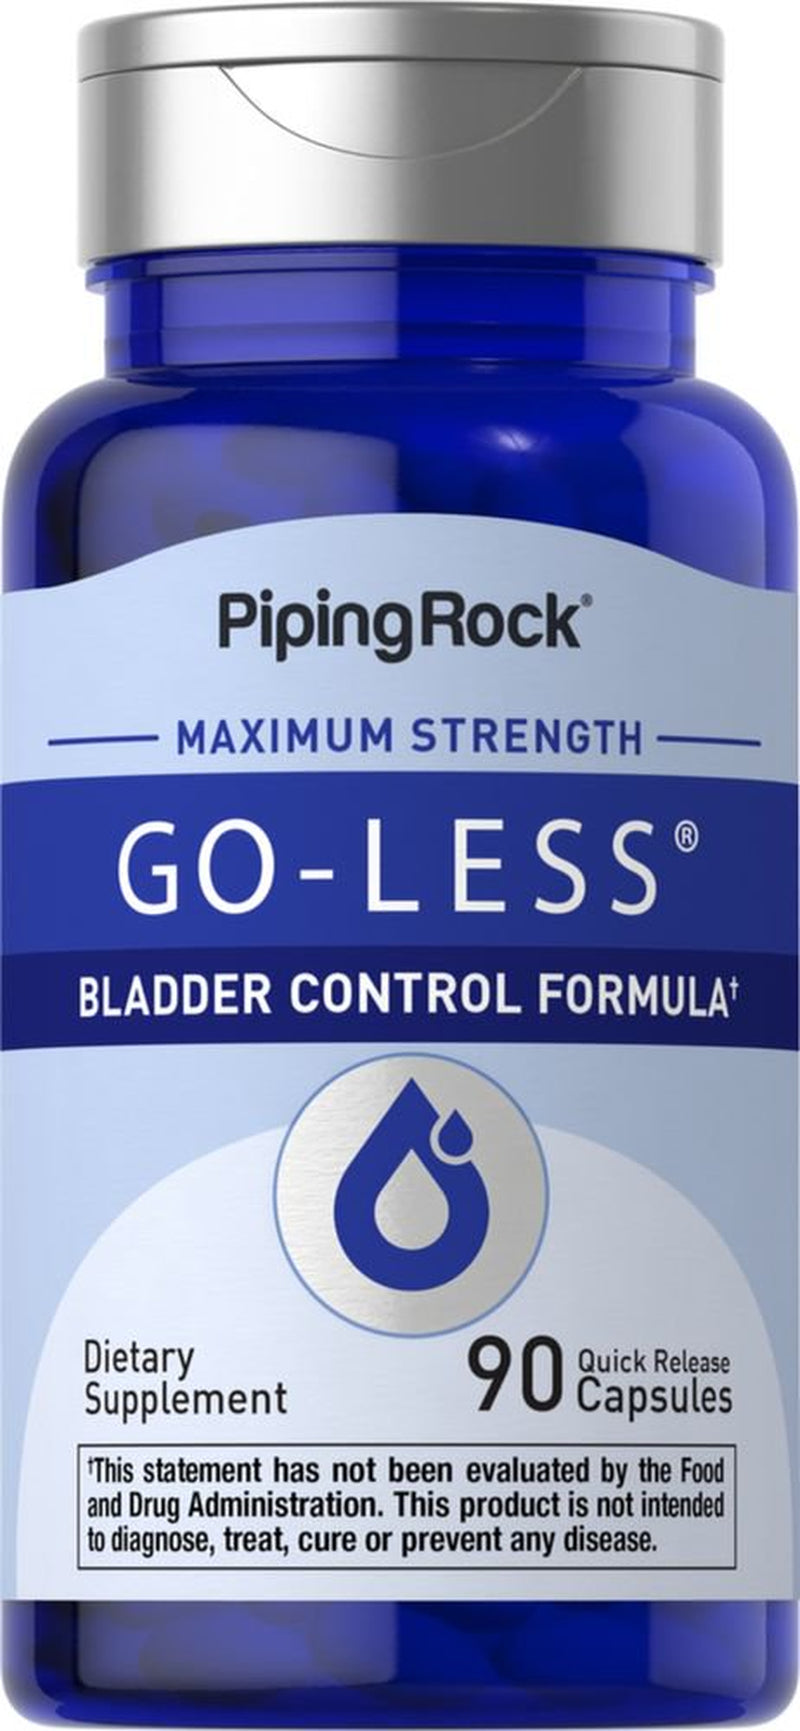 Bladder Control Pills | 90 Capsules | Go Less Formula | by Piping Rock